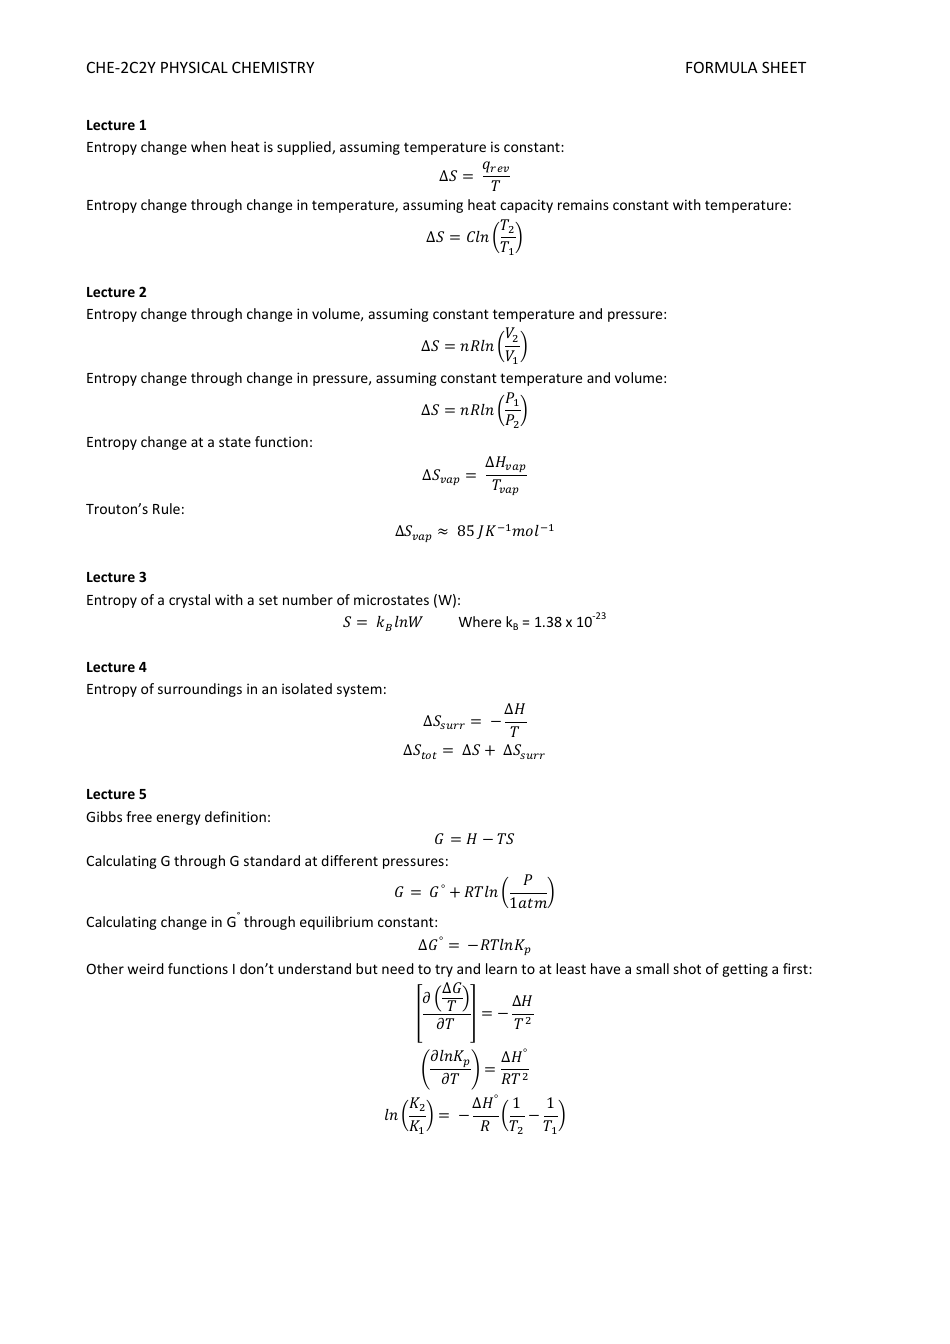 Physical Chemistry Formula Sheet - Template